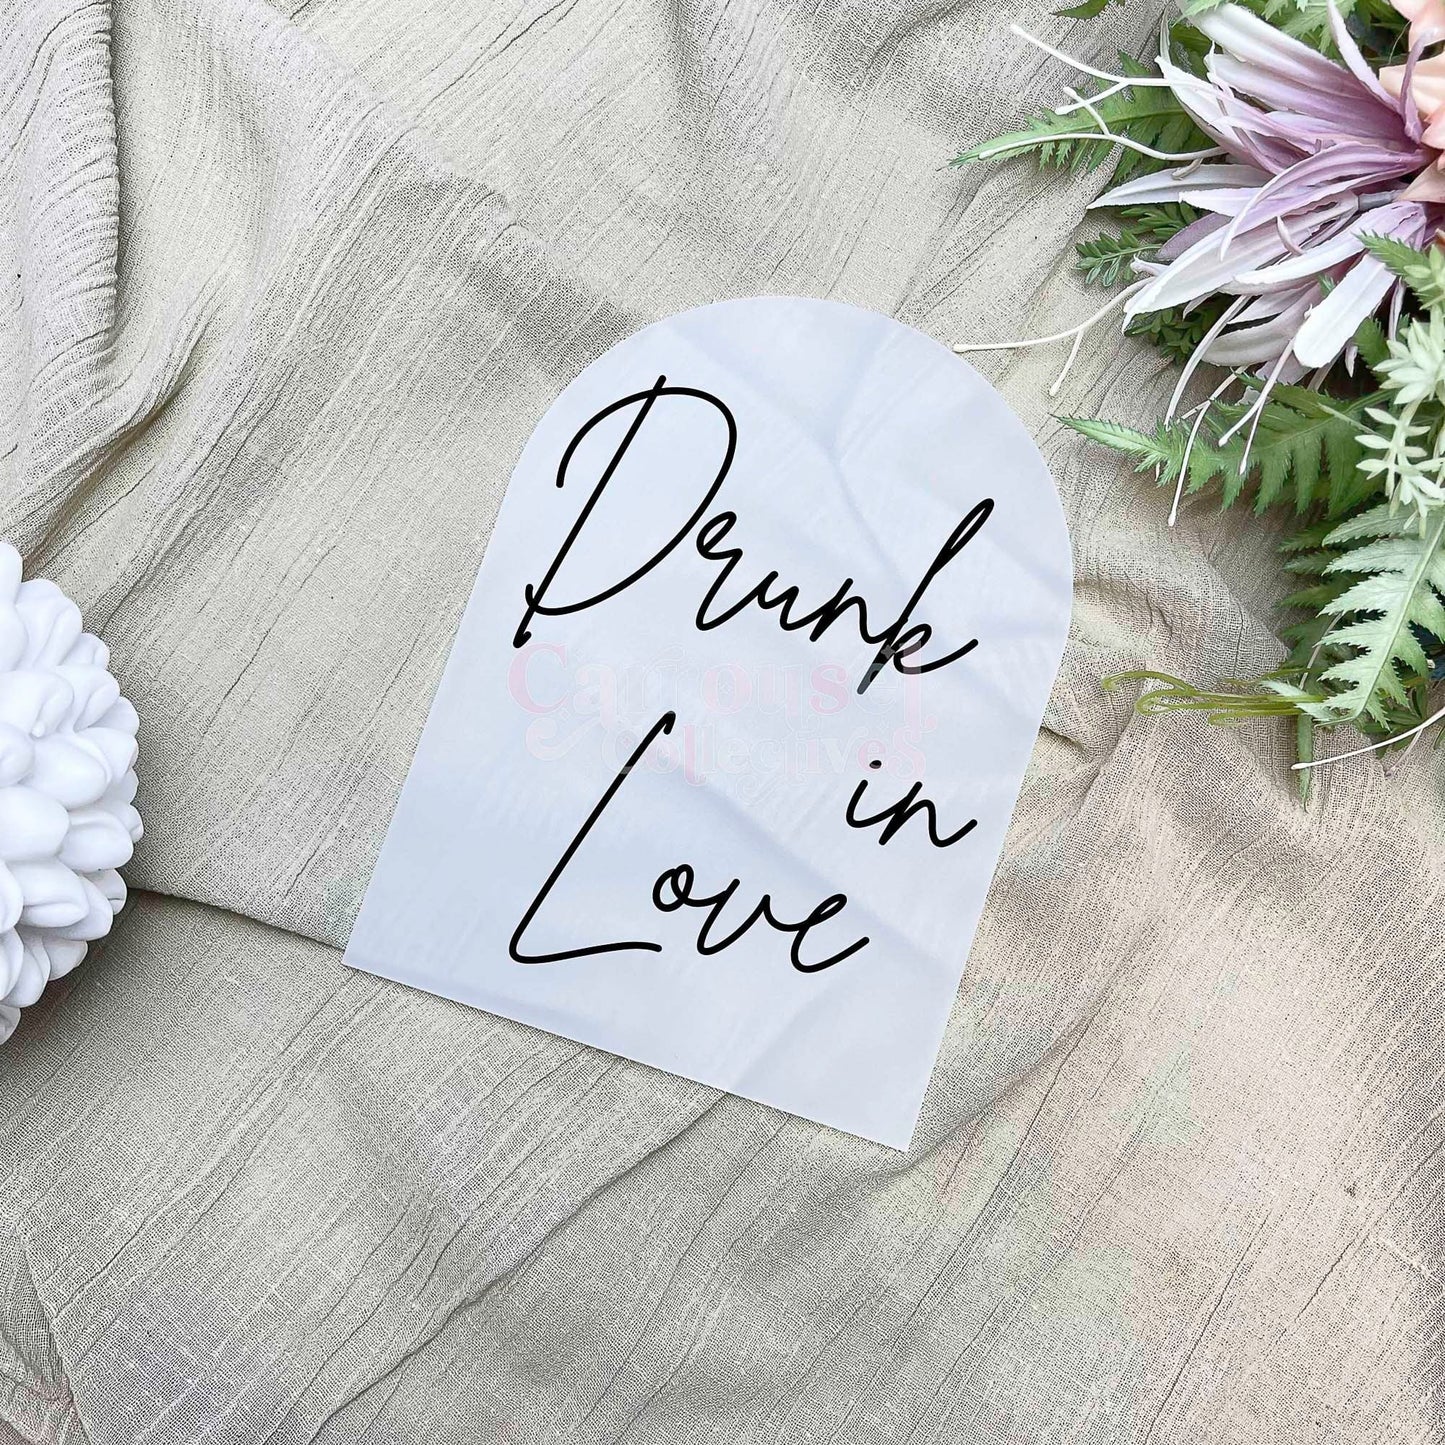 Drunk in love acrylic sign, Wedding Sign, Event Sign, Party Decor